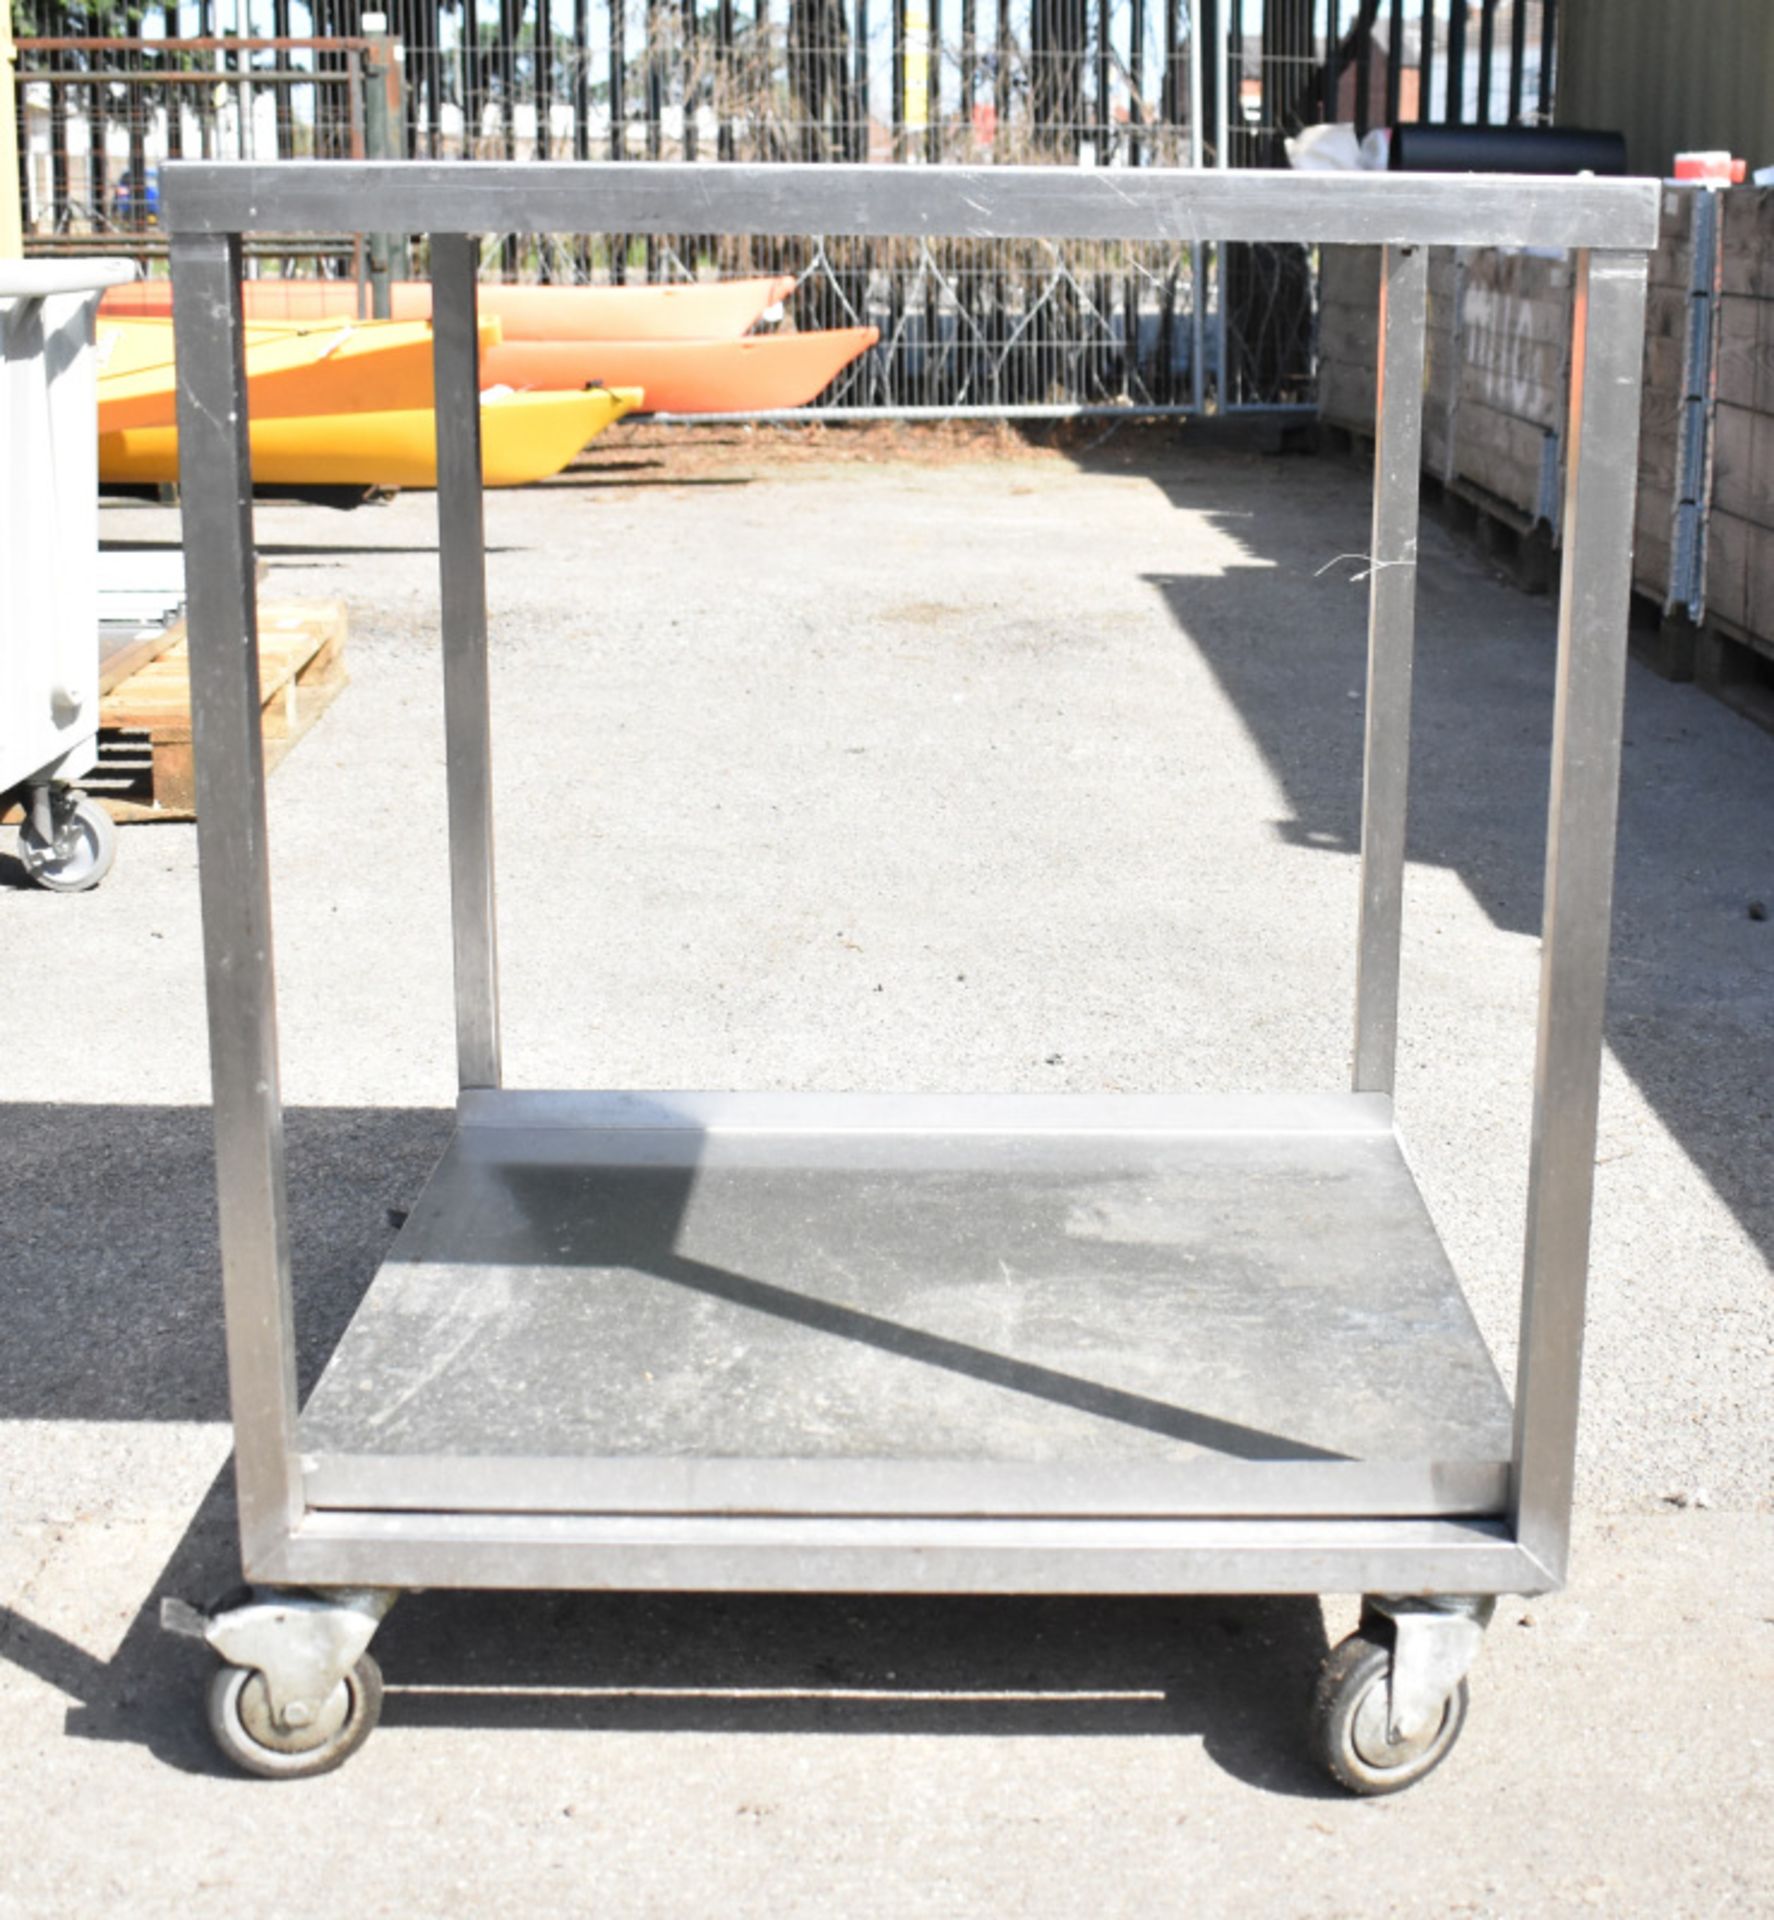 Stainless Steel Mobile Bench - 750 x 750 x 900mm - Image 3 of 3